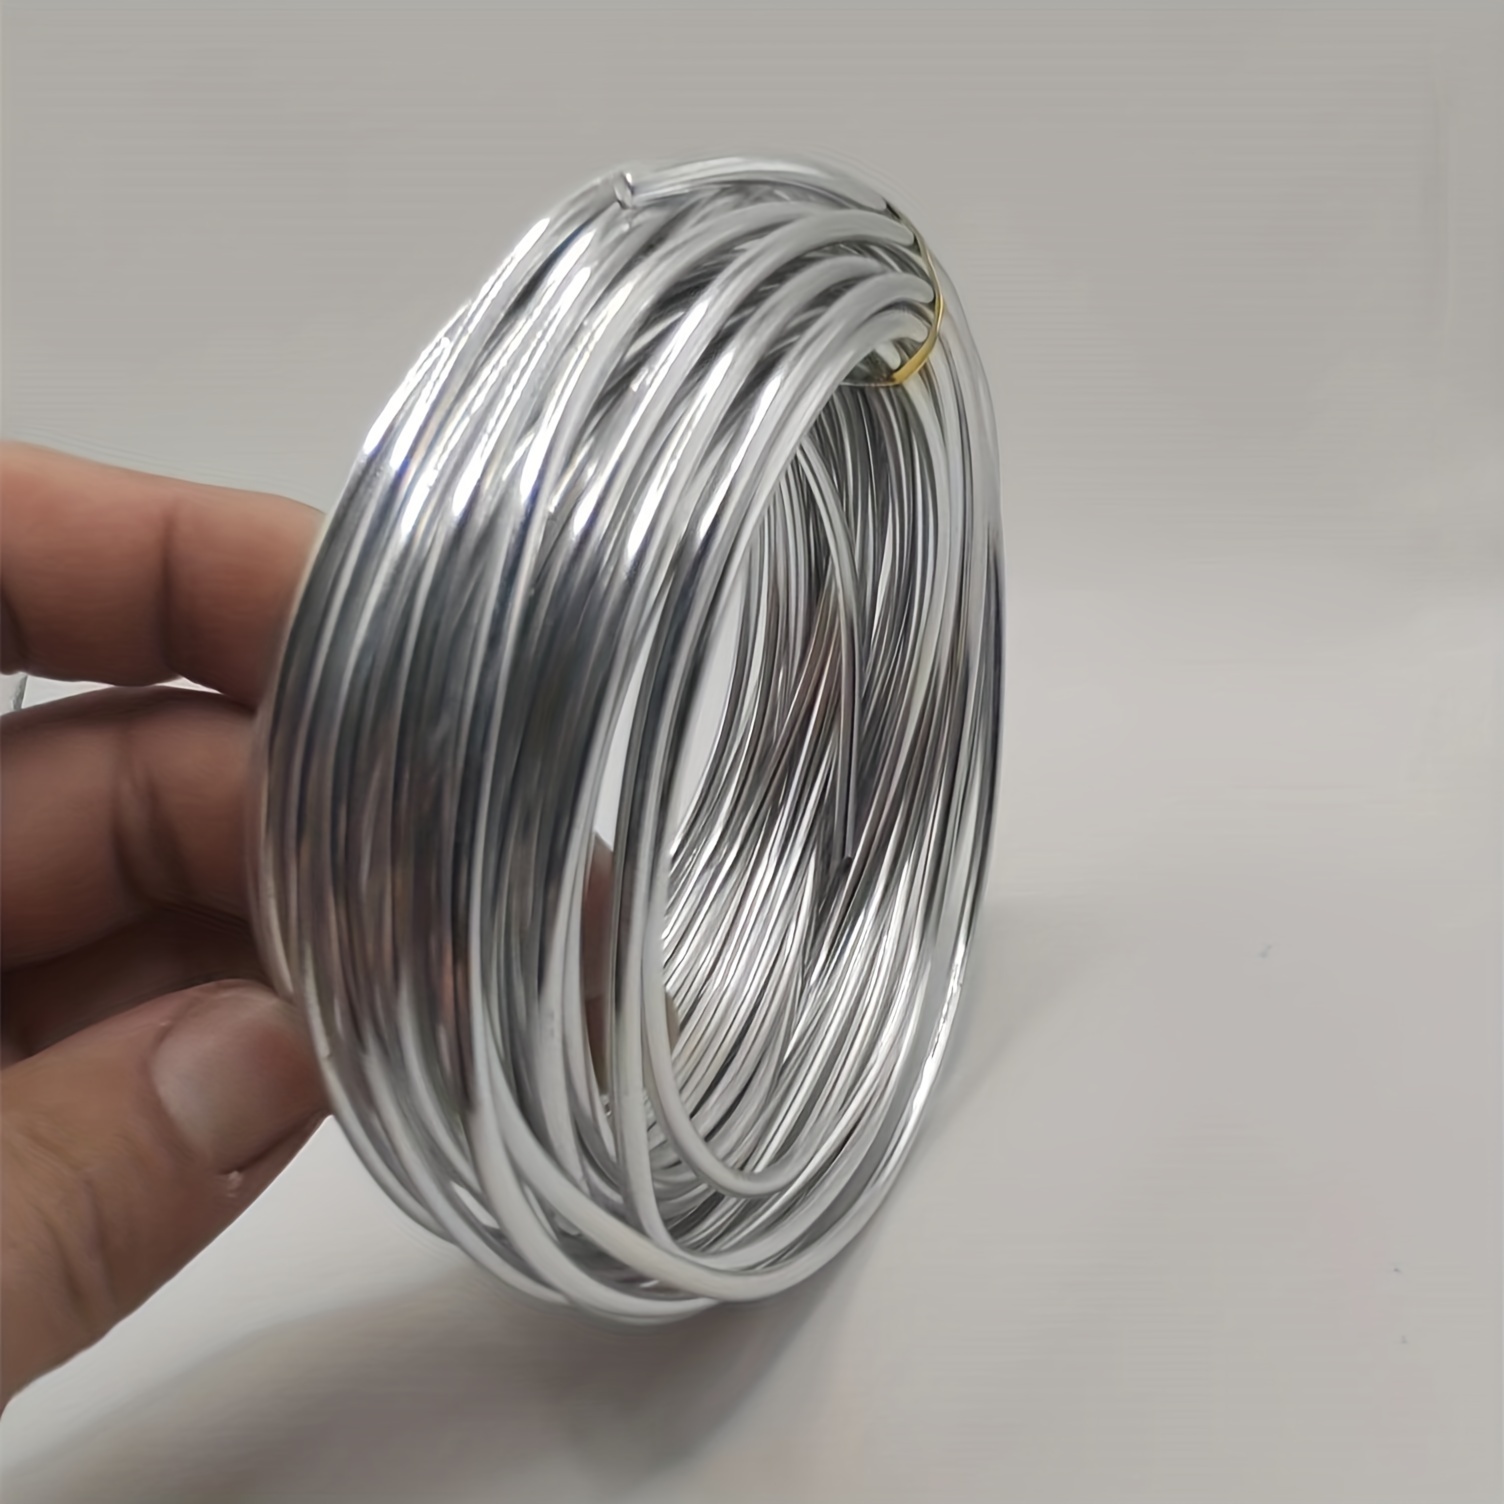 5 Rolls Silver Flat Aluminum Wires Smooth Tiny Wrapping Metal String Soft  3x1mm